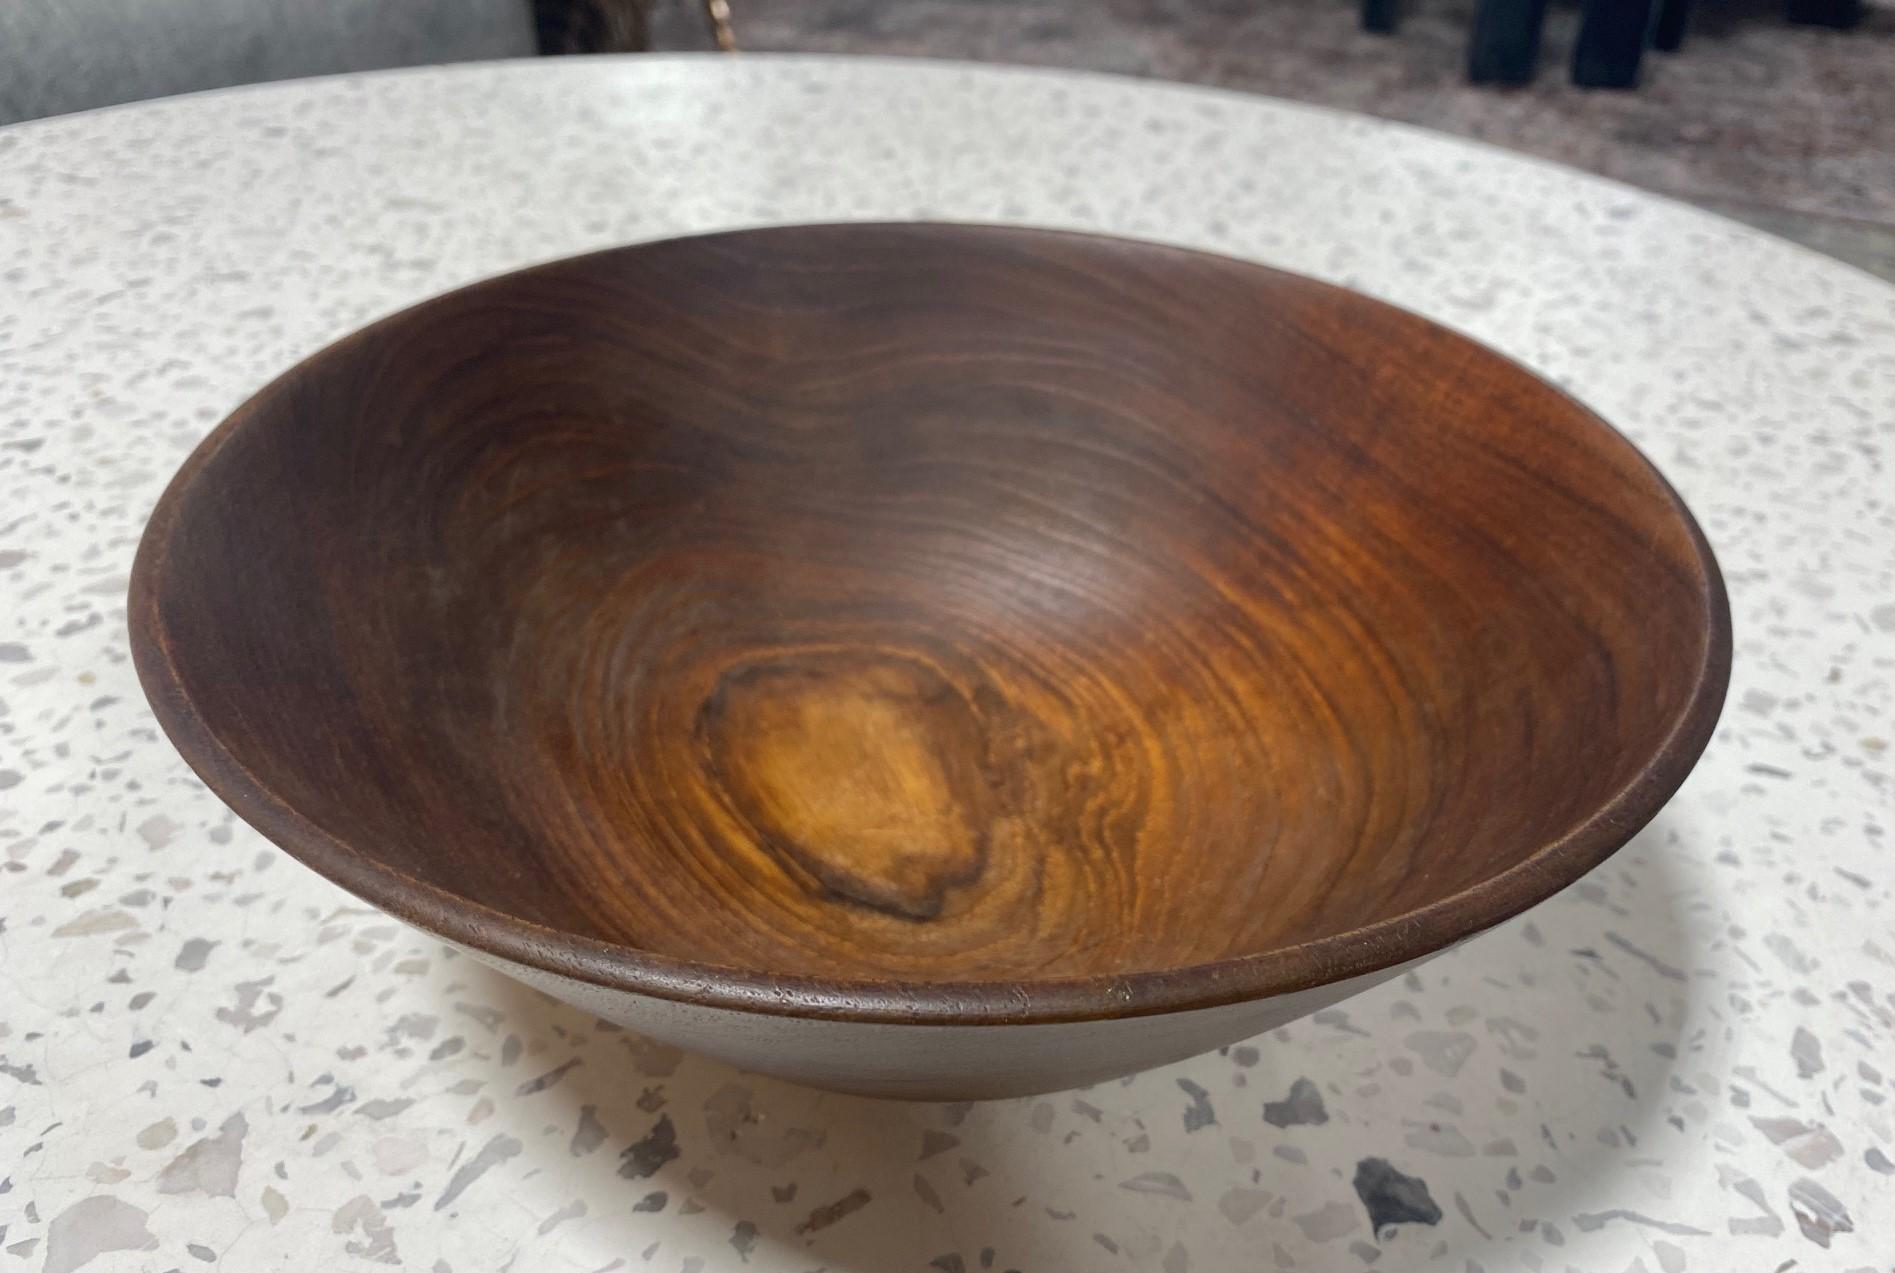 An exquisitely crafted, rich large wood art bowl by American master Woodturner Bob Stocksdale. 

Signed and marked (